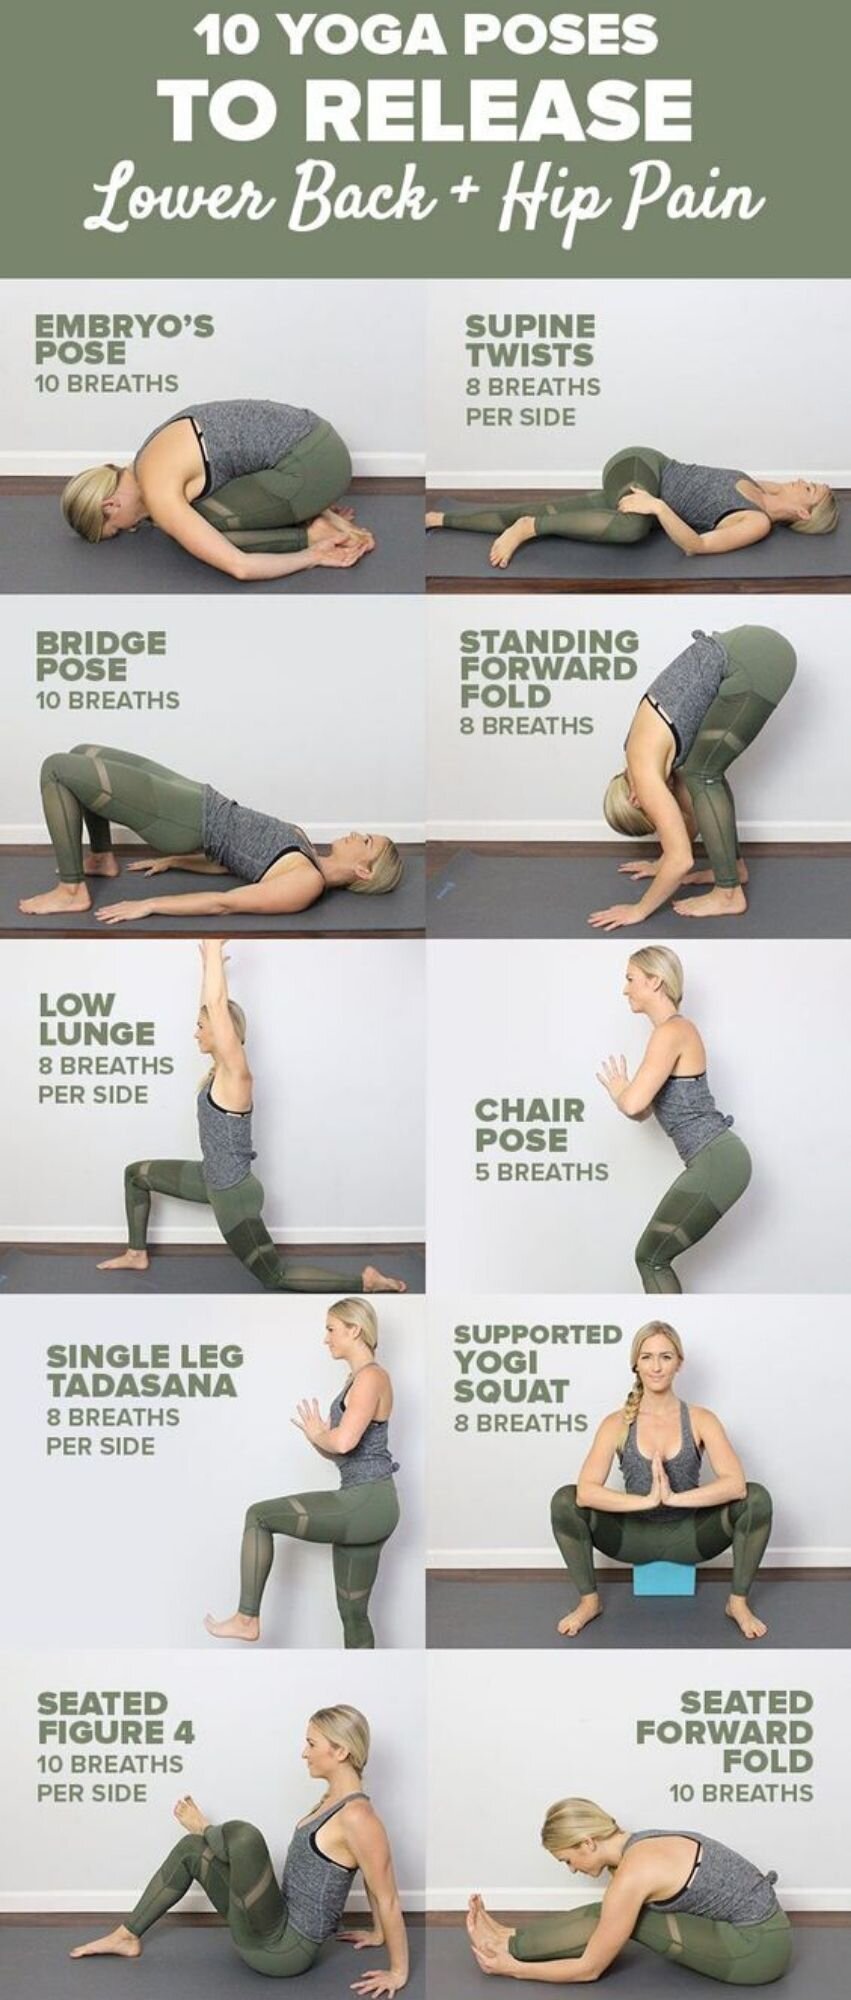 10 Yoga Poses to Release Lower Back and Hip Pain — Bluestar Medical, P.A.